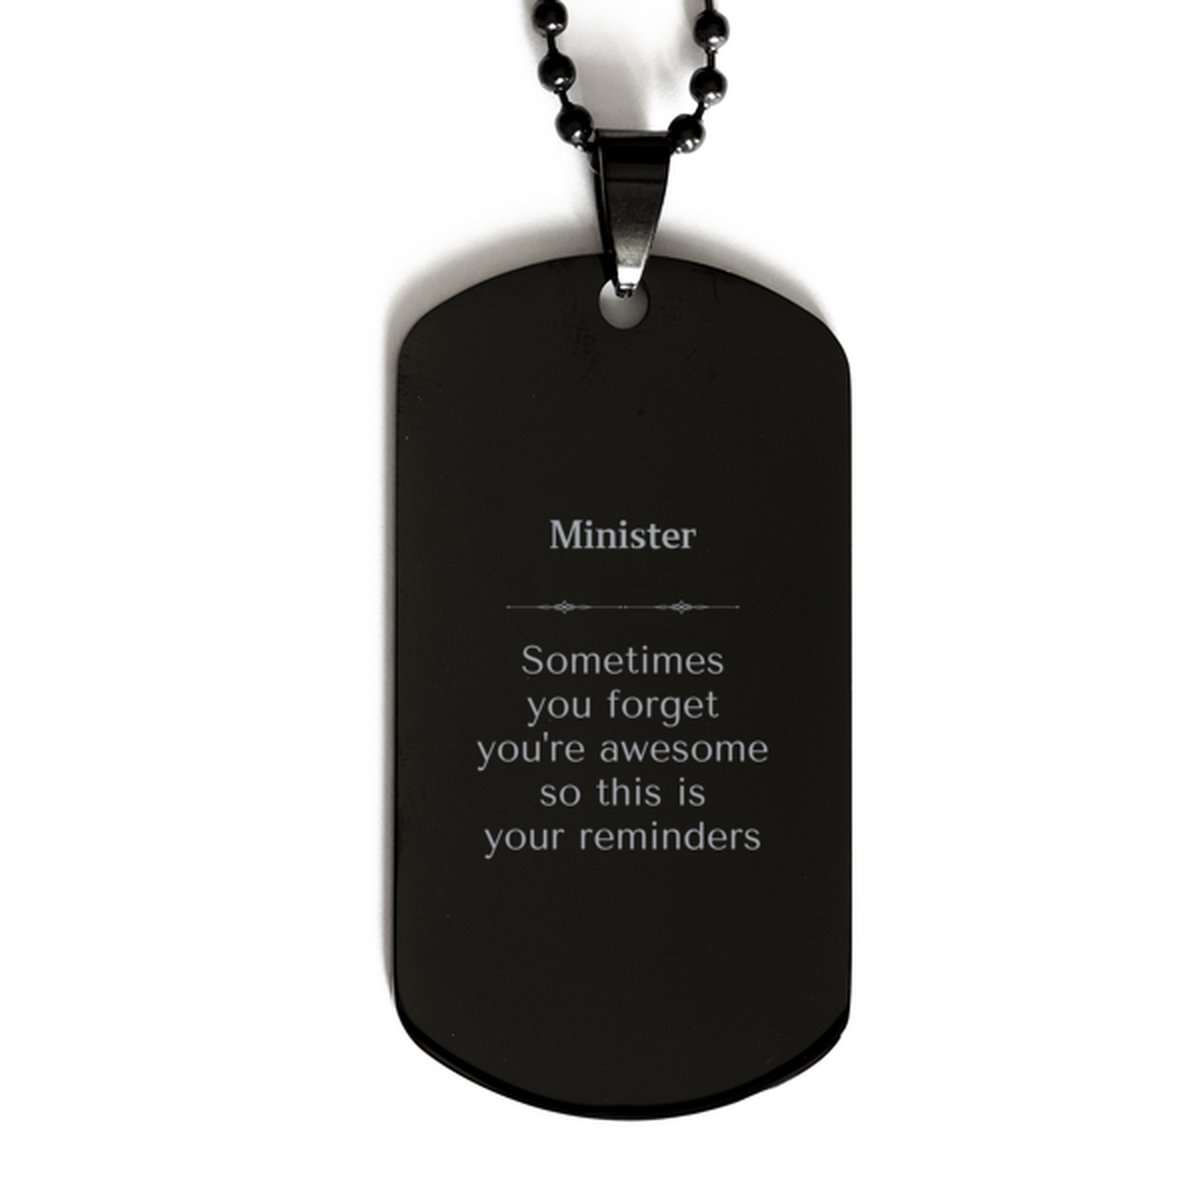 Sentimental Minister Black Dog Tag, Minister Sometimes you forget you're awesome so this is your reminders, Graduation Christmas Birthday Gifts for Minister, Men, Women, Coworkers